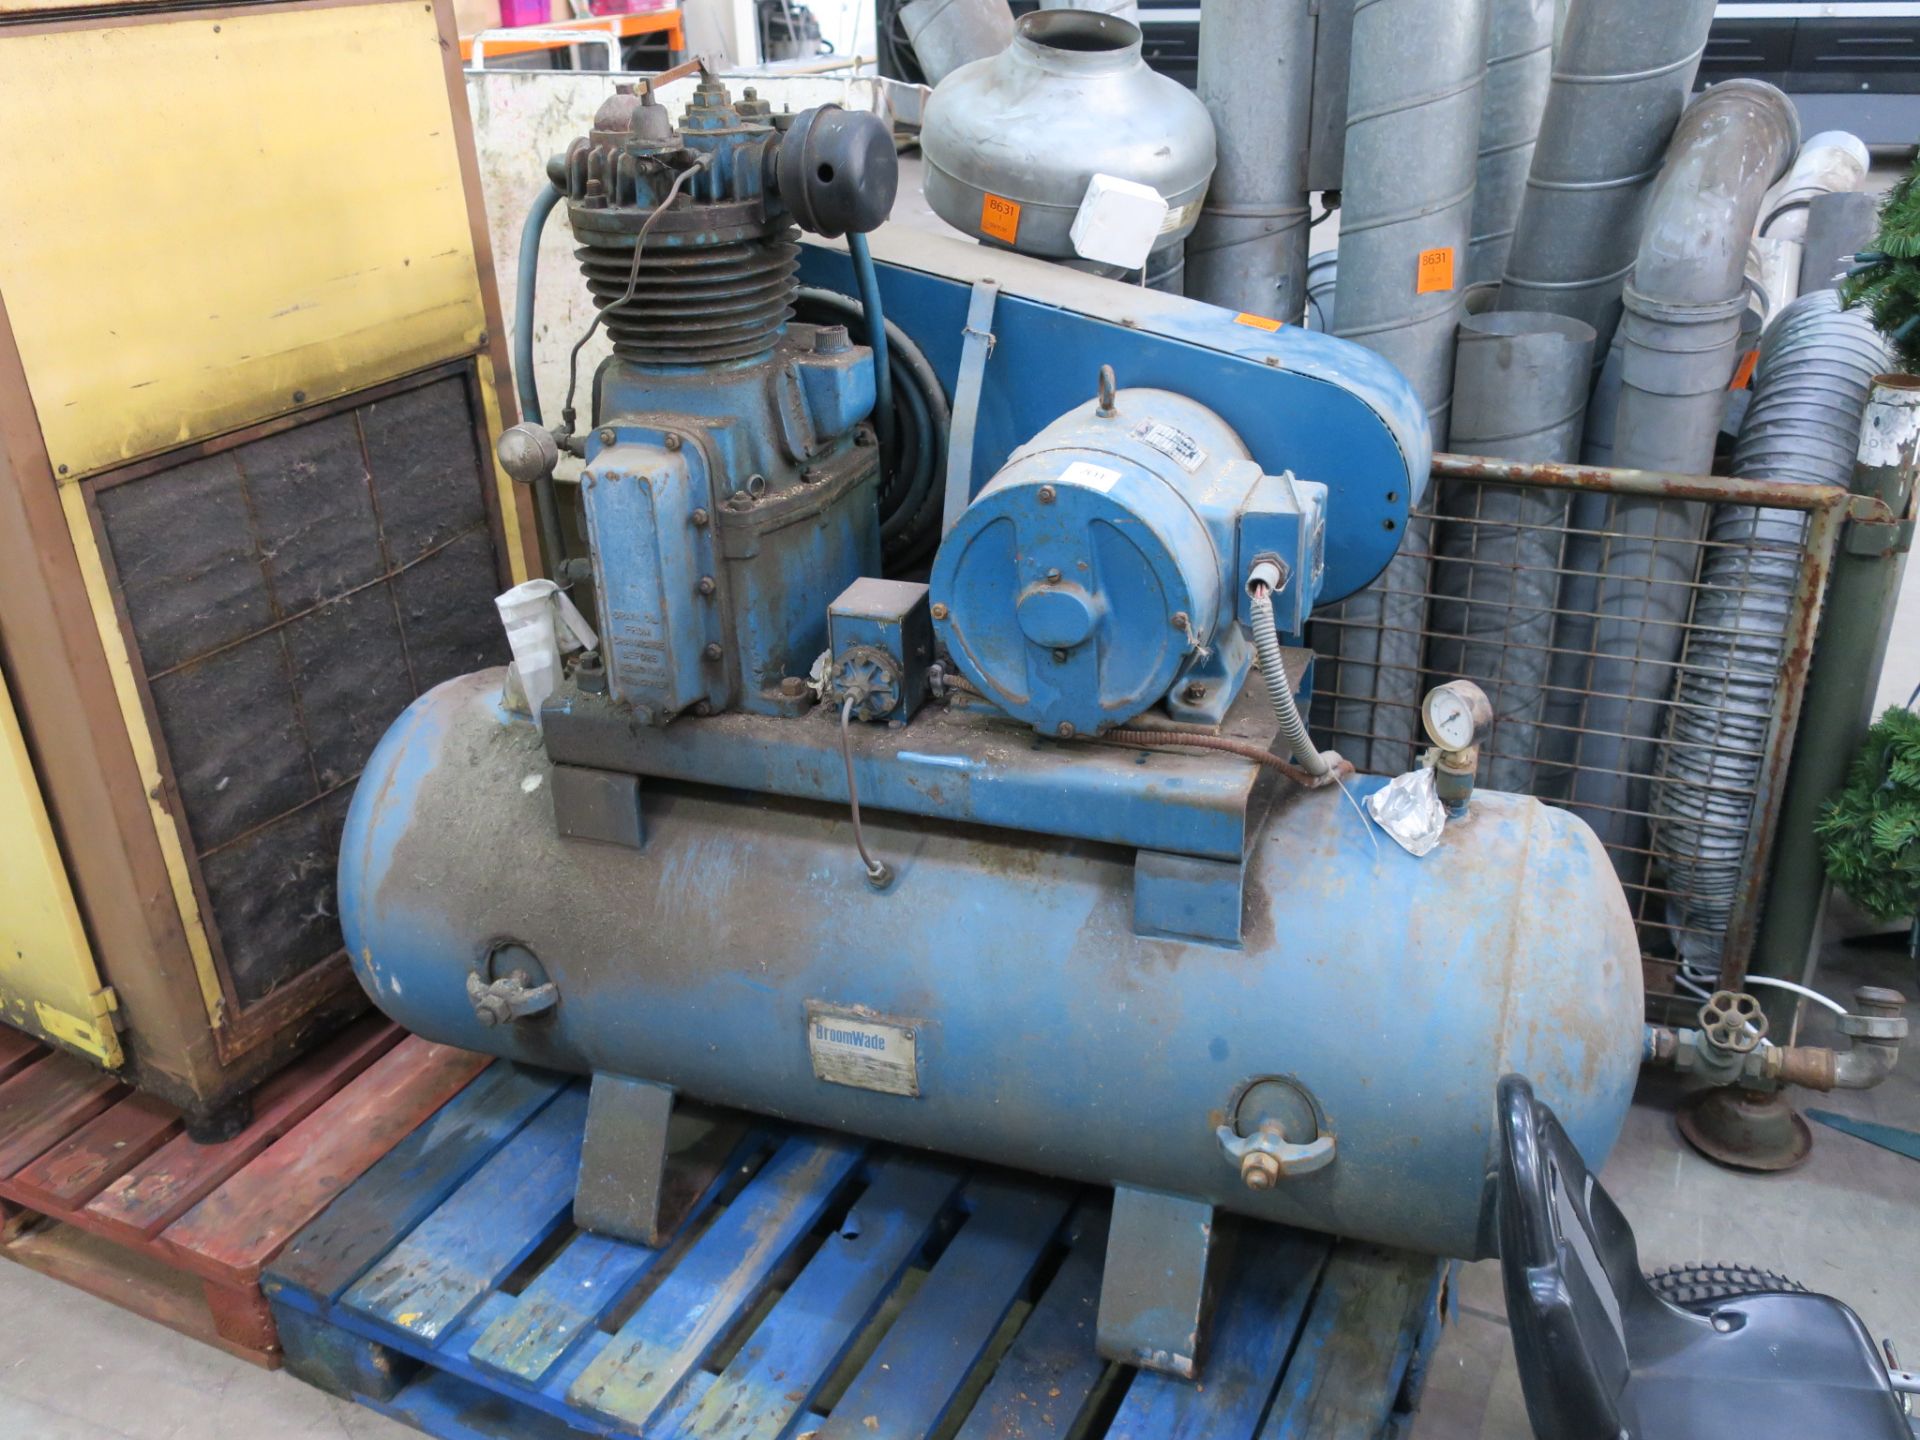 * A Broomwade 5-5kW, 7.5 HP, 76499 3 PH Compressor. Please note there is a £10 + VAT Lift Out Fee on